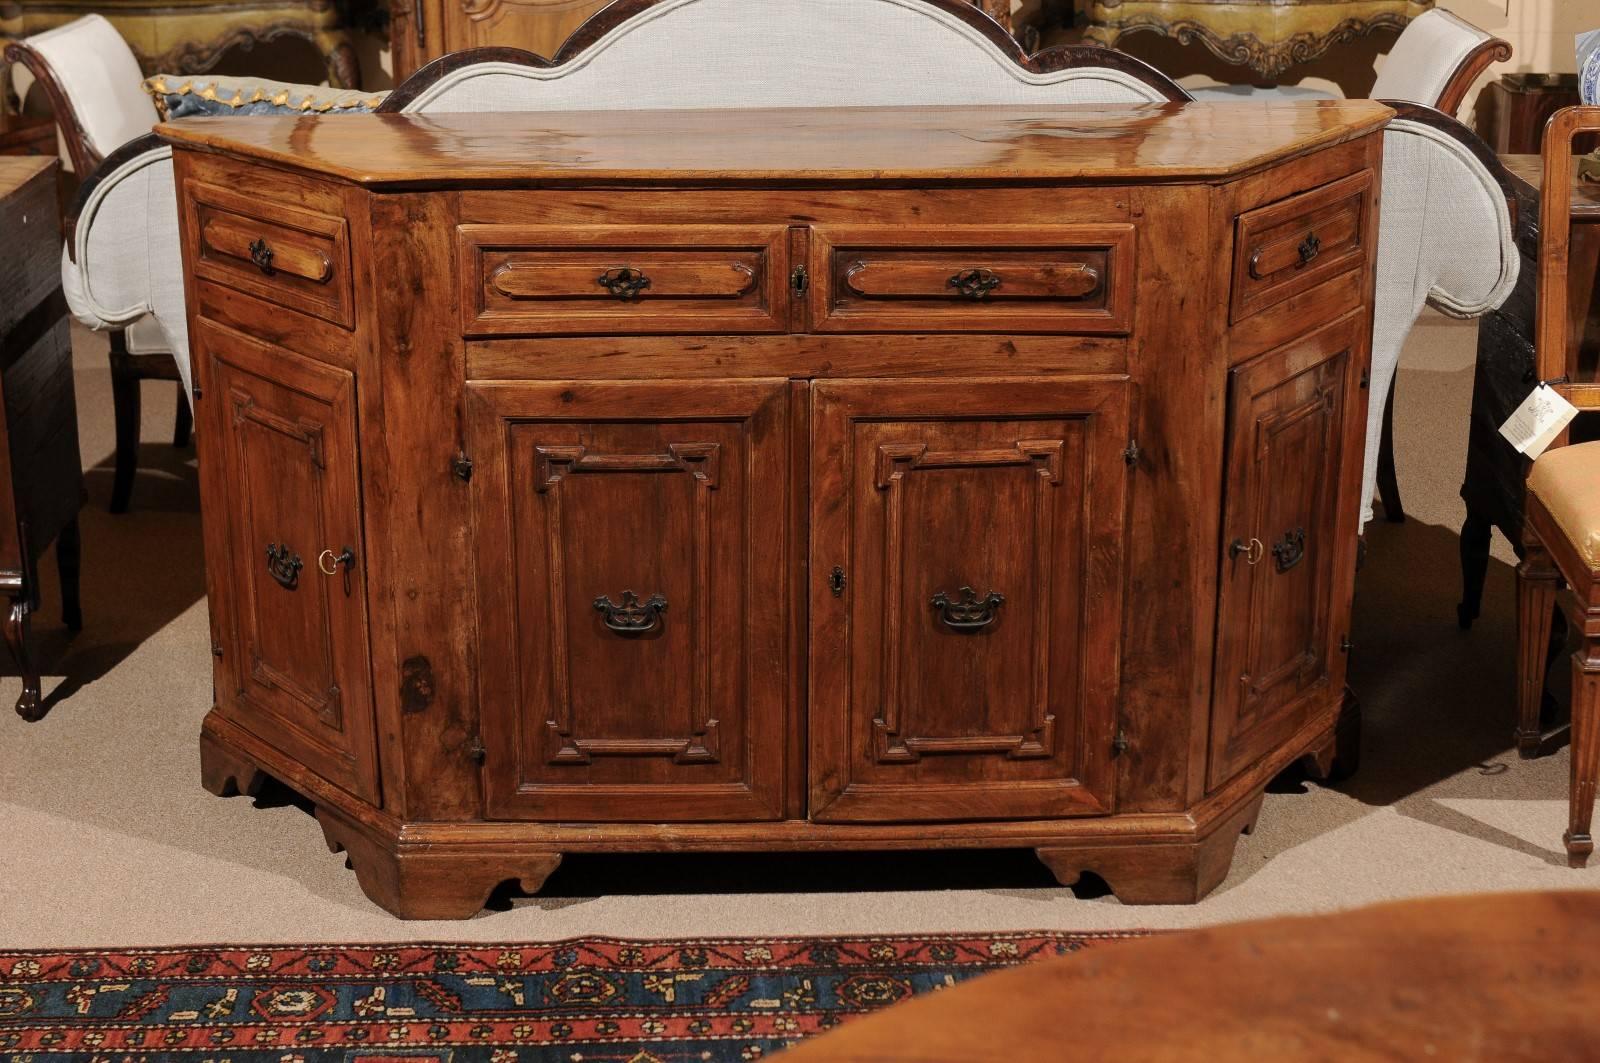 Baroque walnut credenza with canted sides, carved paneled raised drawers and carved paneled doors below. All resting on carved bracket feet.